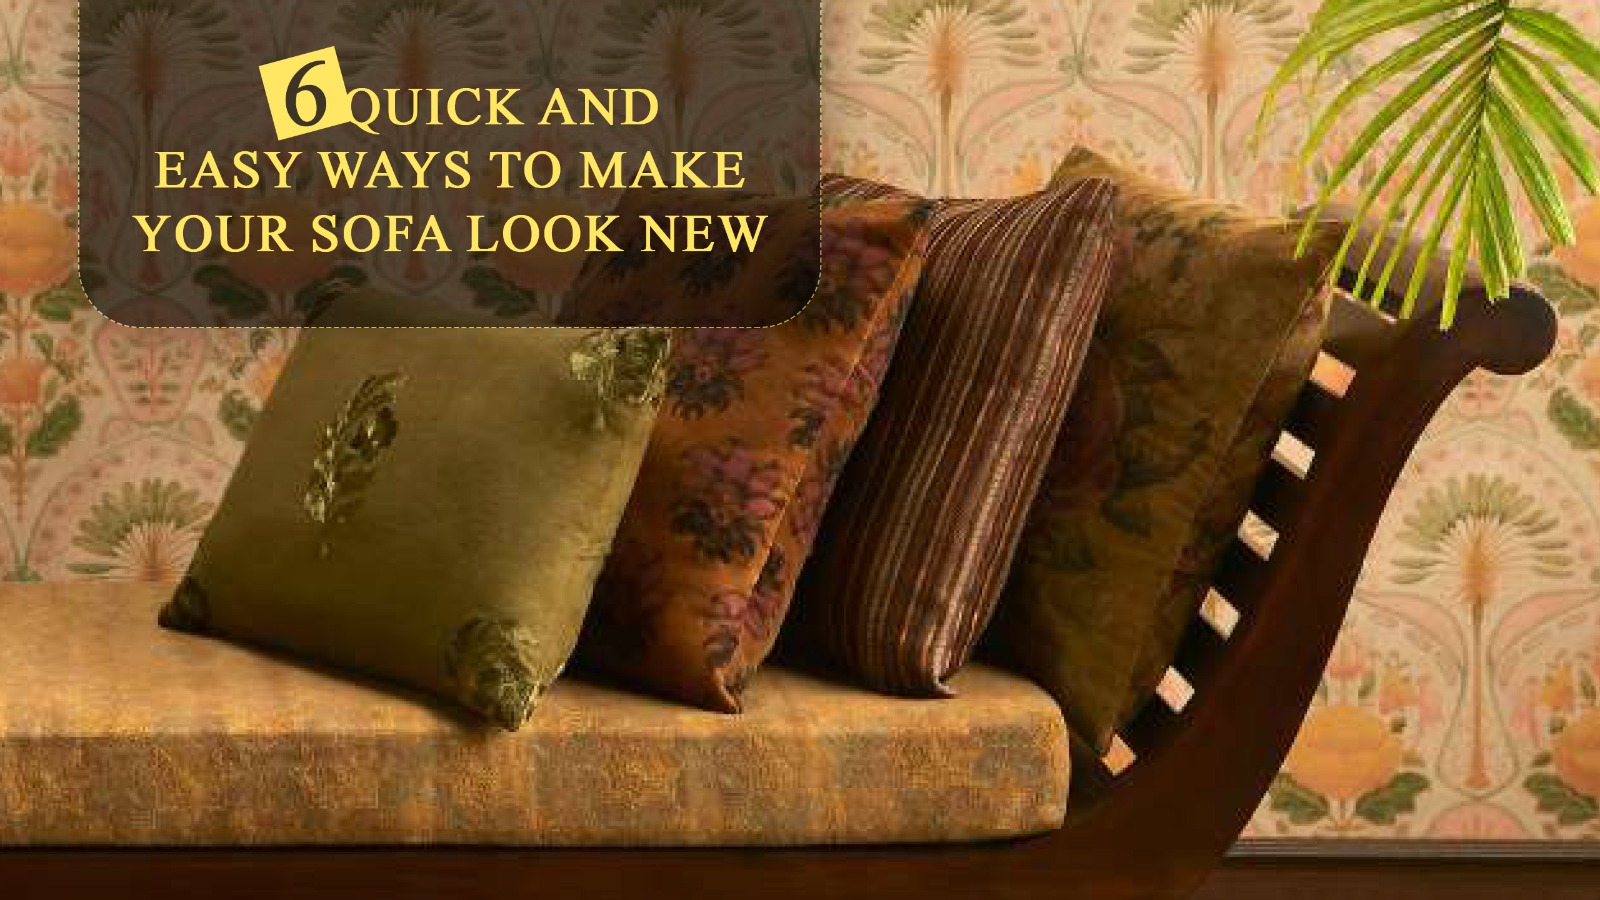 6 Quick and Easy Ways to Make Your Sofa Look New